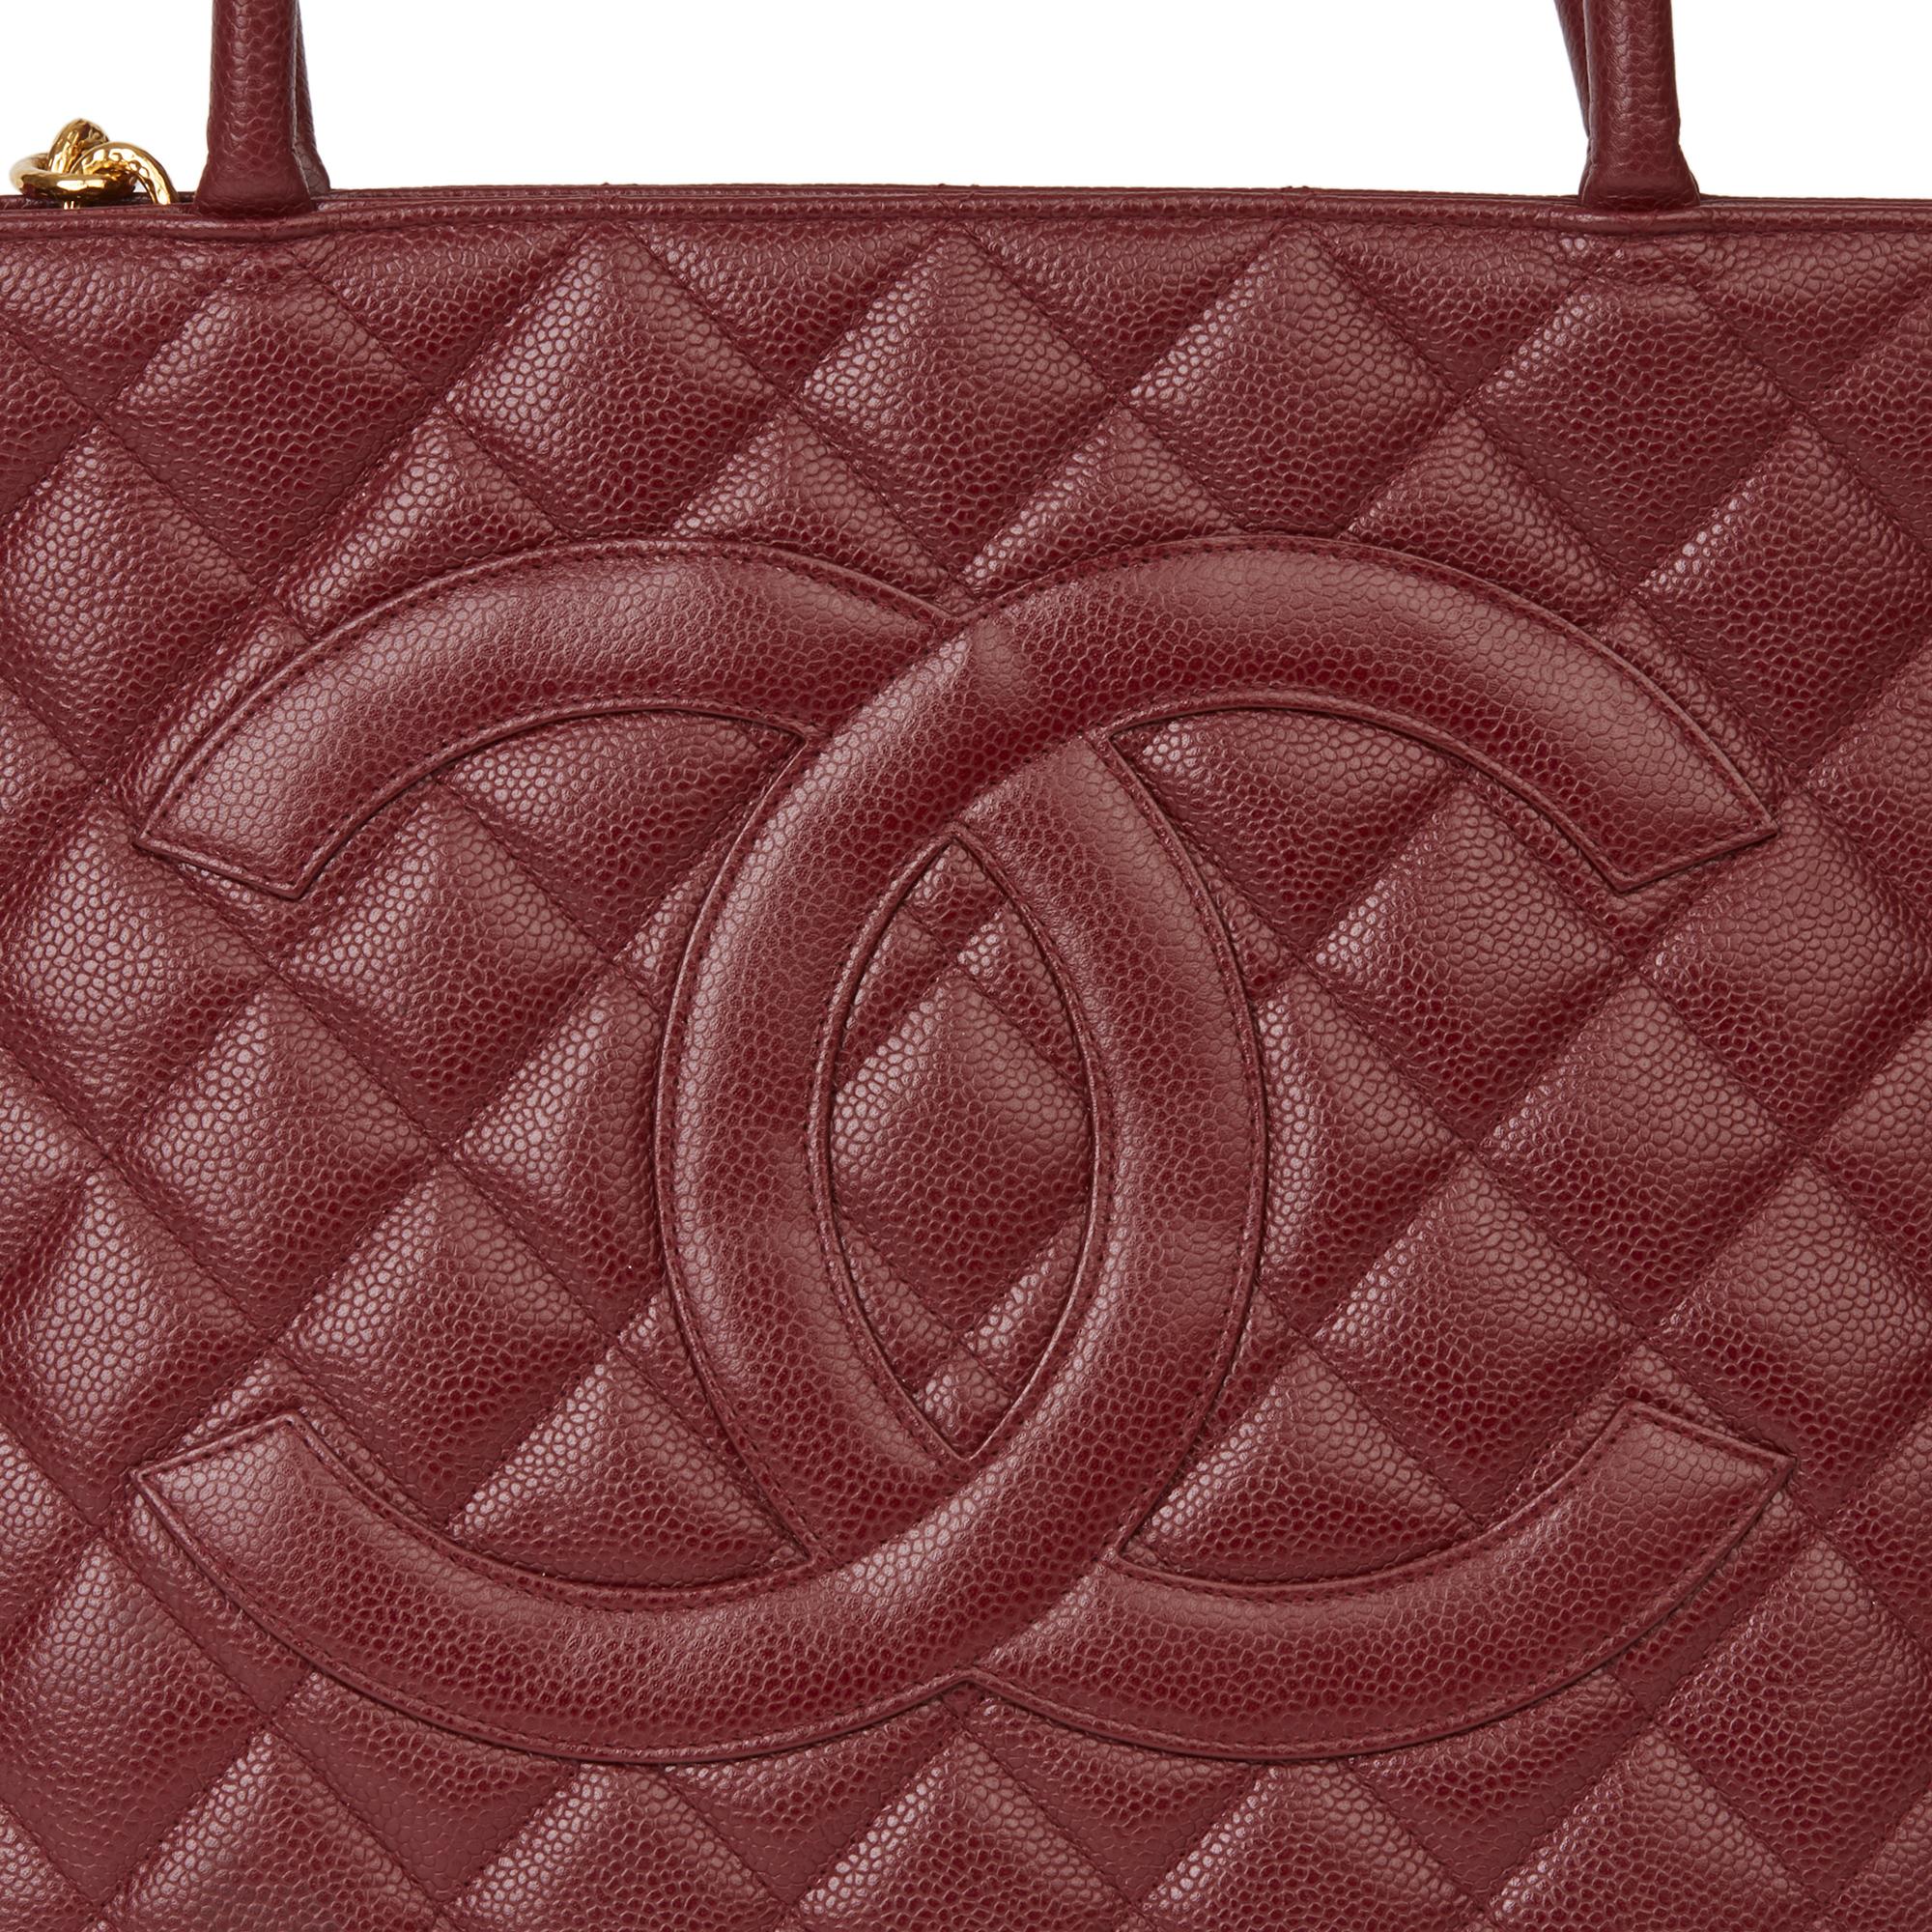 1999 Chanel Burgundy Quilted Caviar Leather Vintage Medallion Tote  1